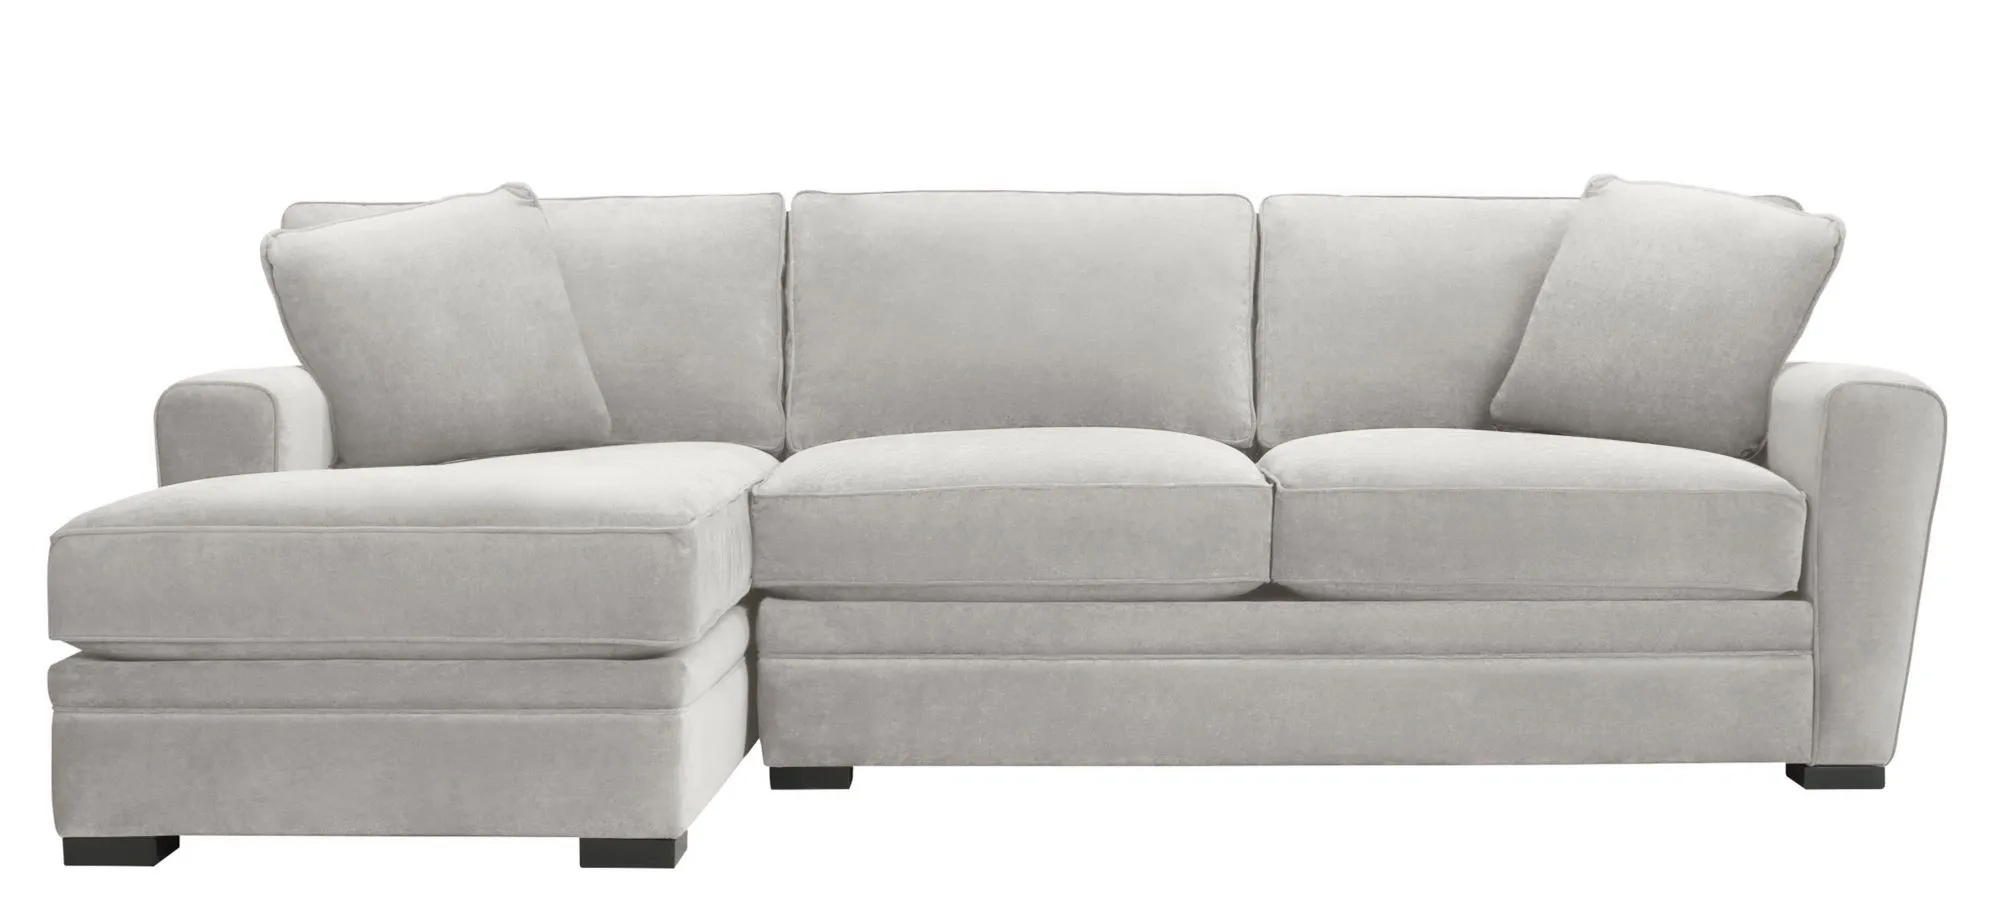 Artemis II 2-pc. Left Hand Facing Sectional Sofa in Gypsy Vapor by Jonathan Louis